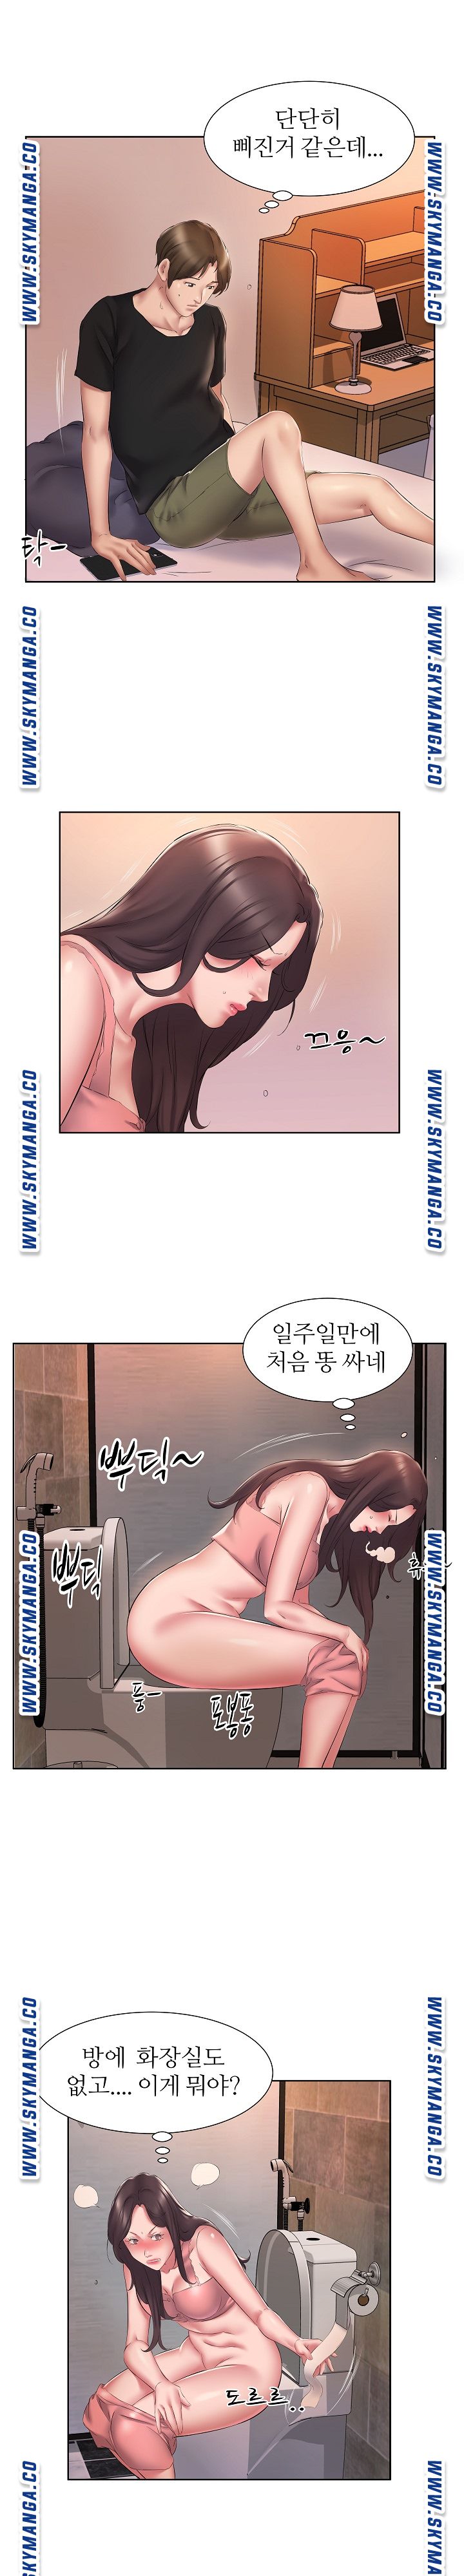 One Room Hotel Raw - Chapter 2 Page 15